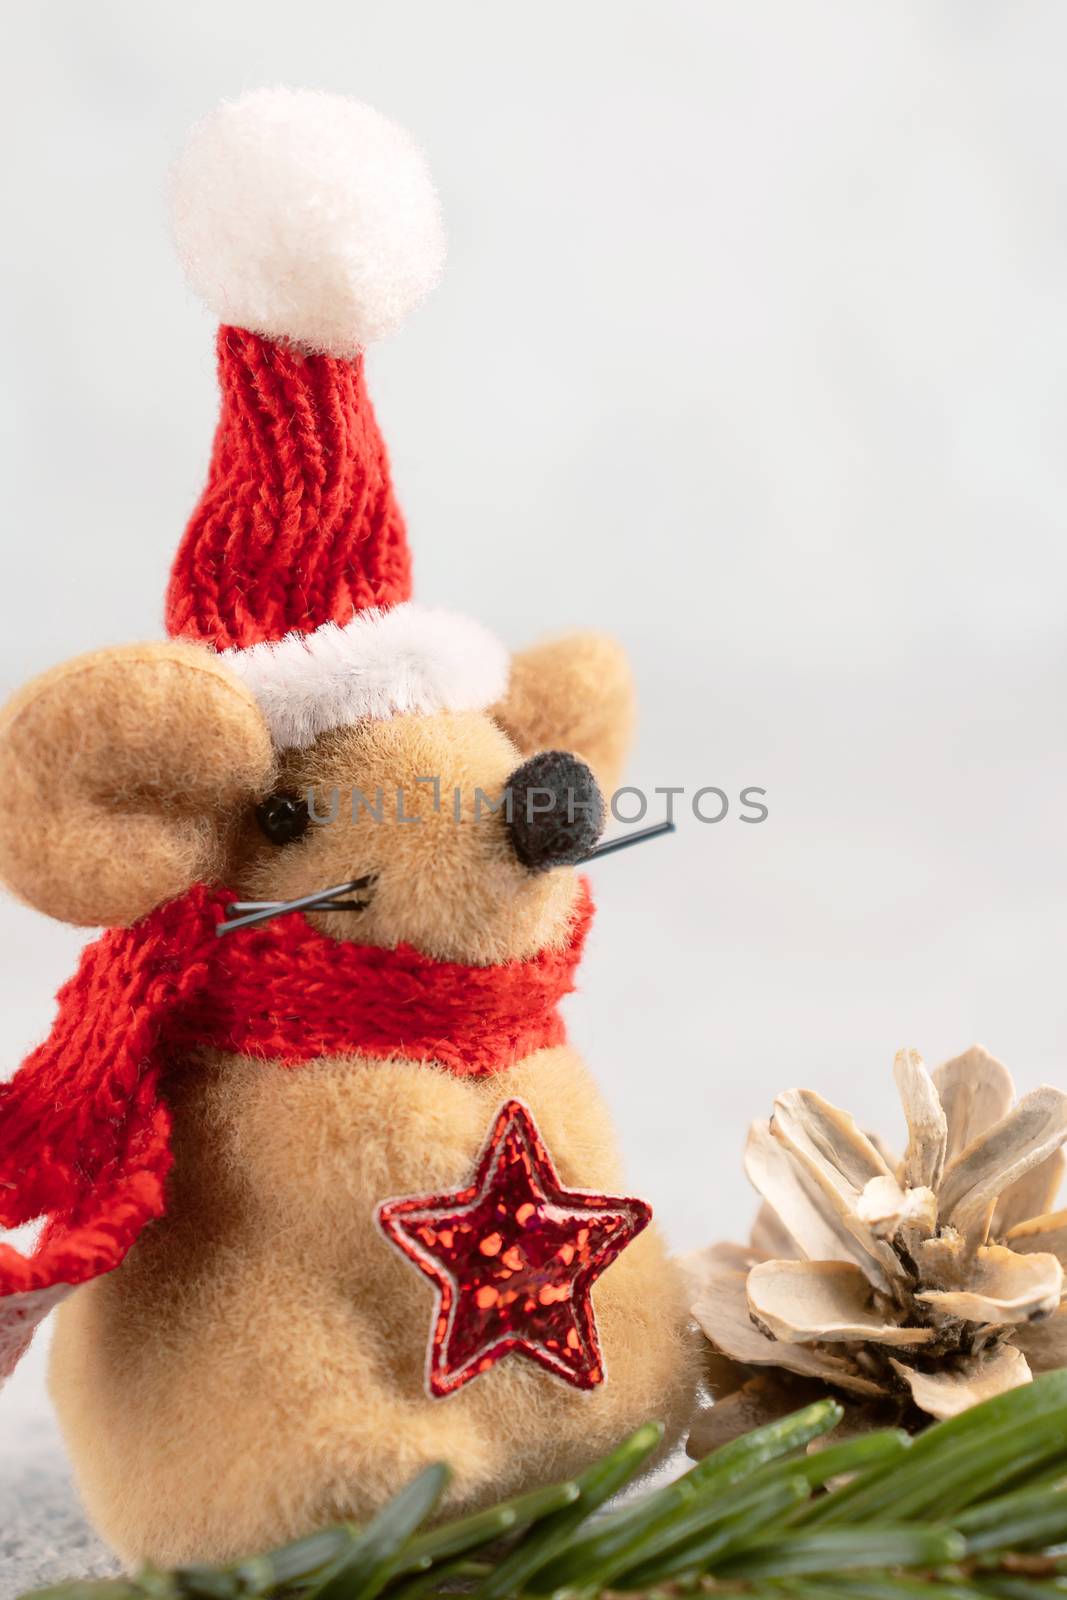 Little toy Christmas mouse and decorations on a gray table. Christmas composition with the symbol of 2020 according to the Chinese horoscope, horizontal banner with copy space.